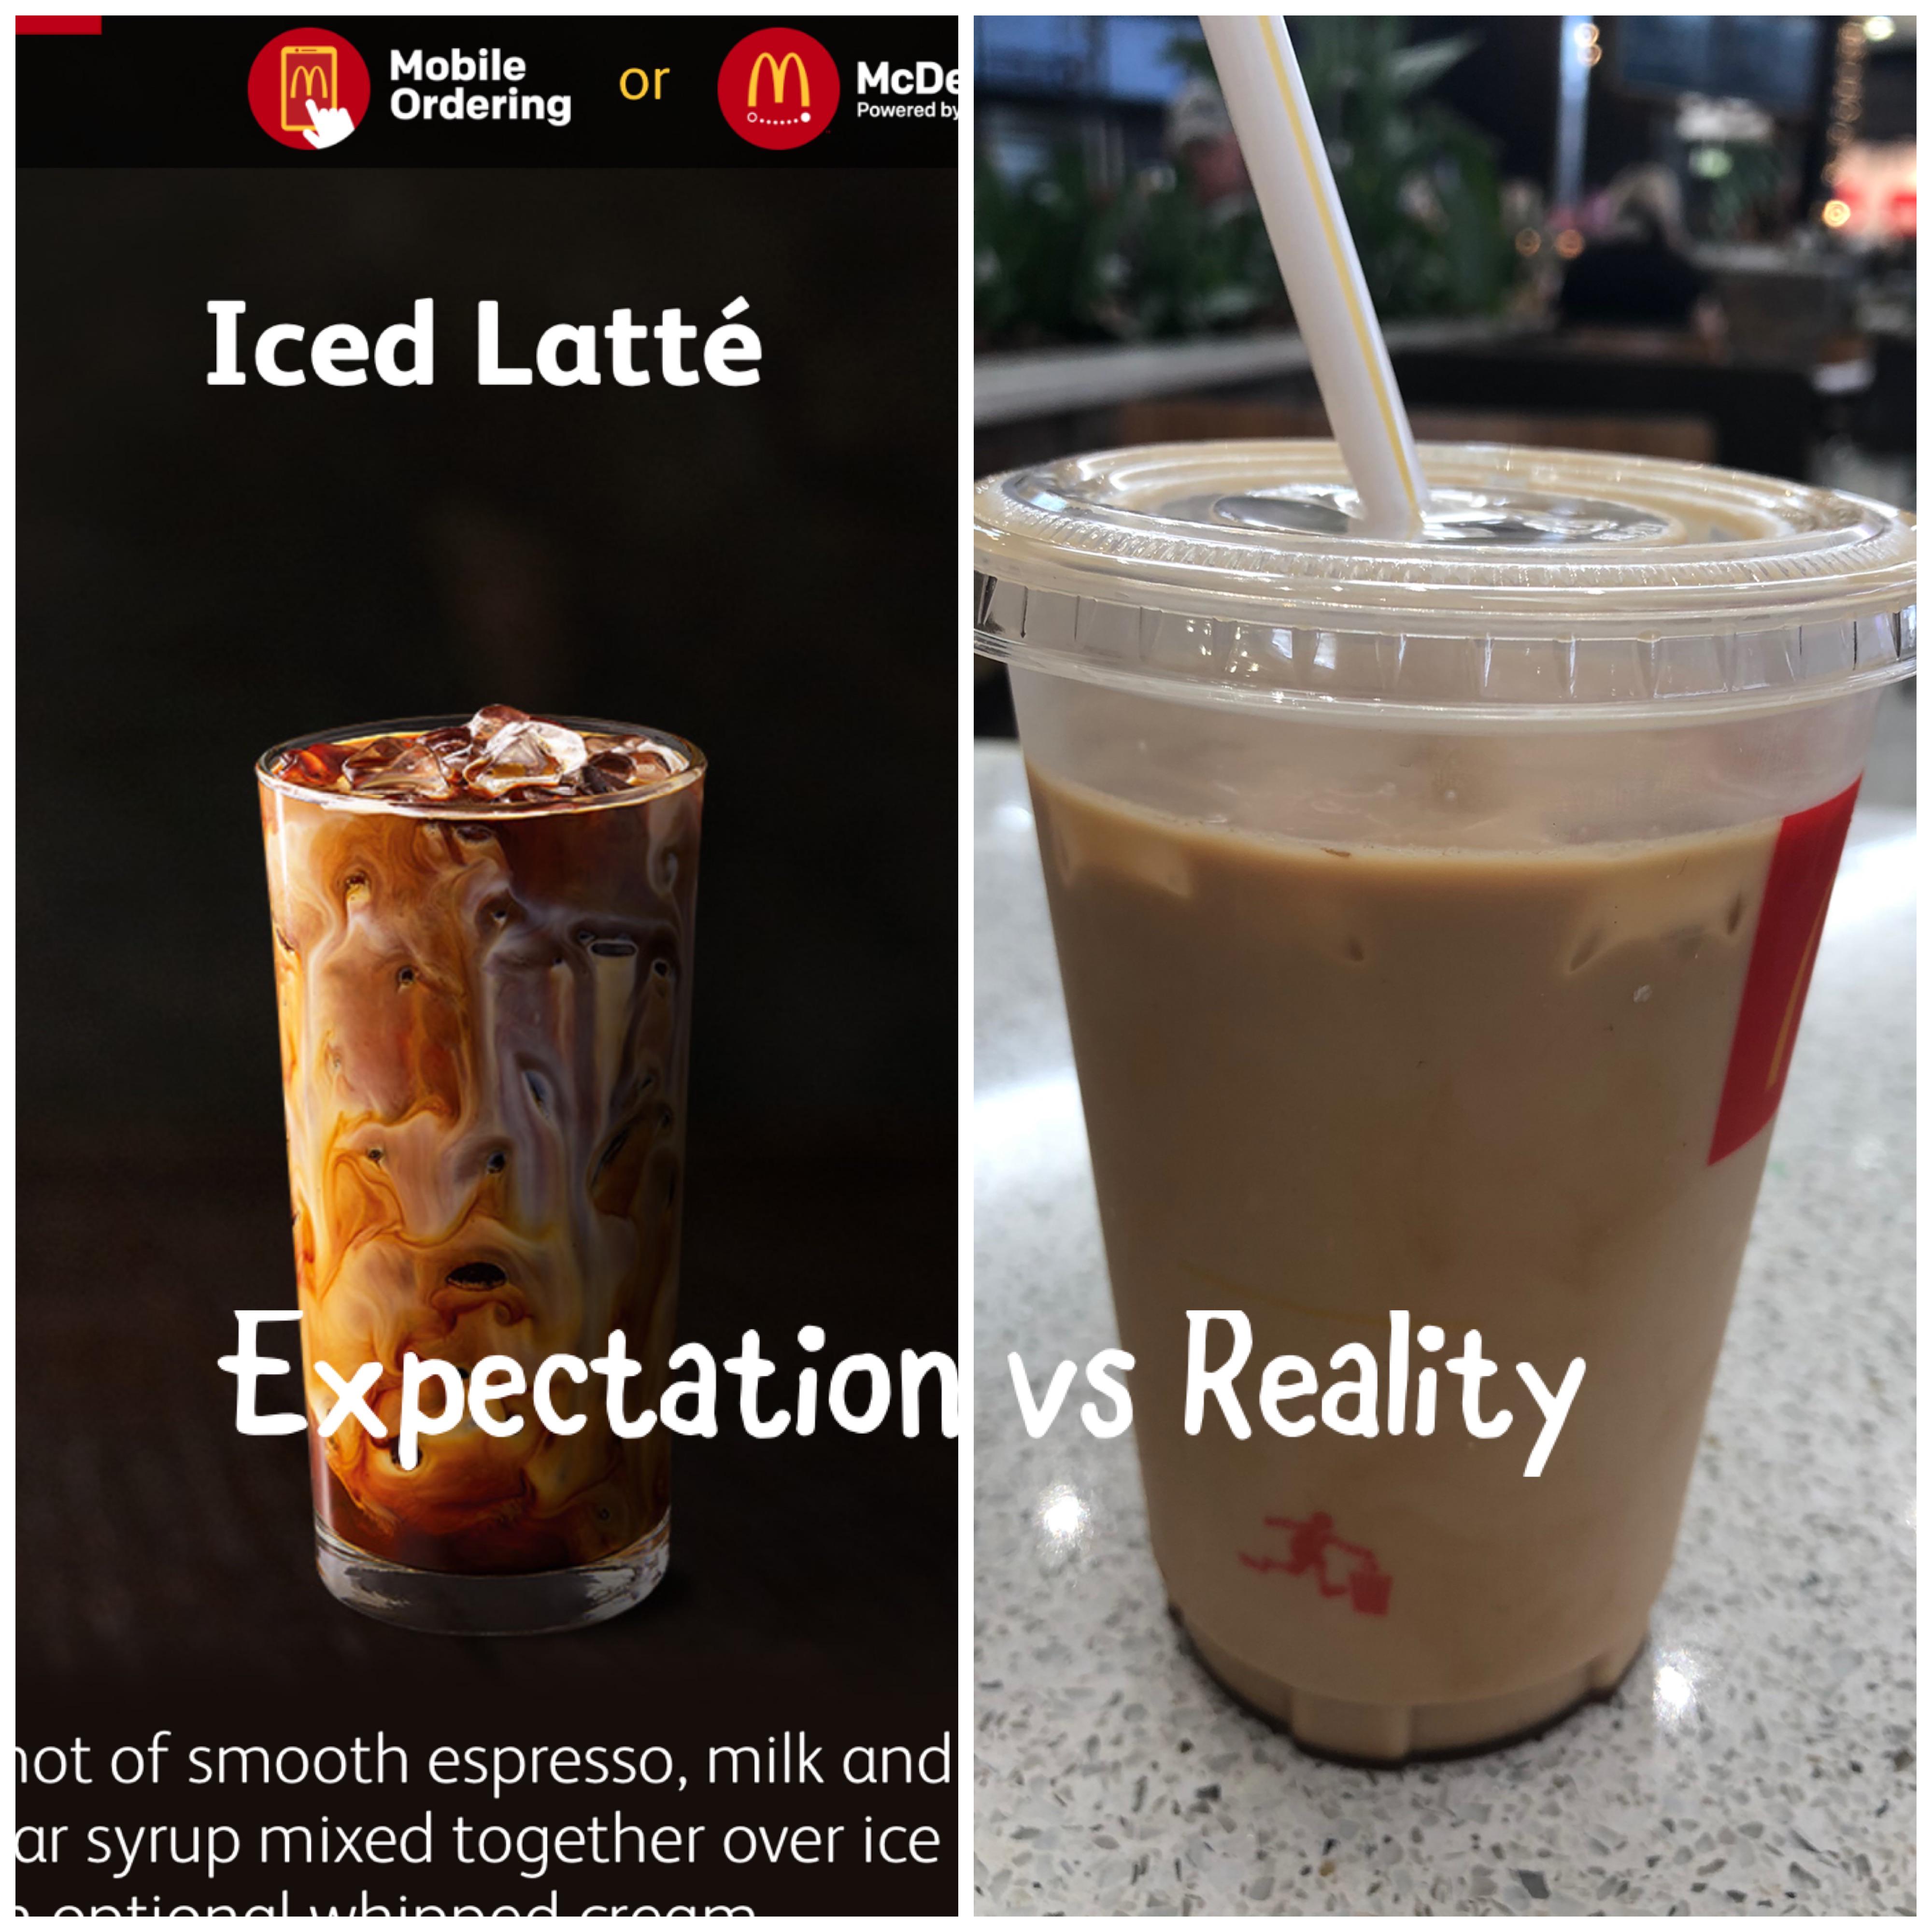 frappé coffee - Ordering or McDE Iced Latt Expectation vs Reality hot of smooth espresso, milk and ar syrup mixed together over ice antiselubinderen